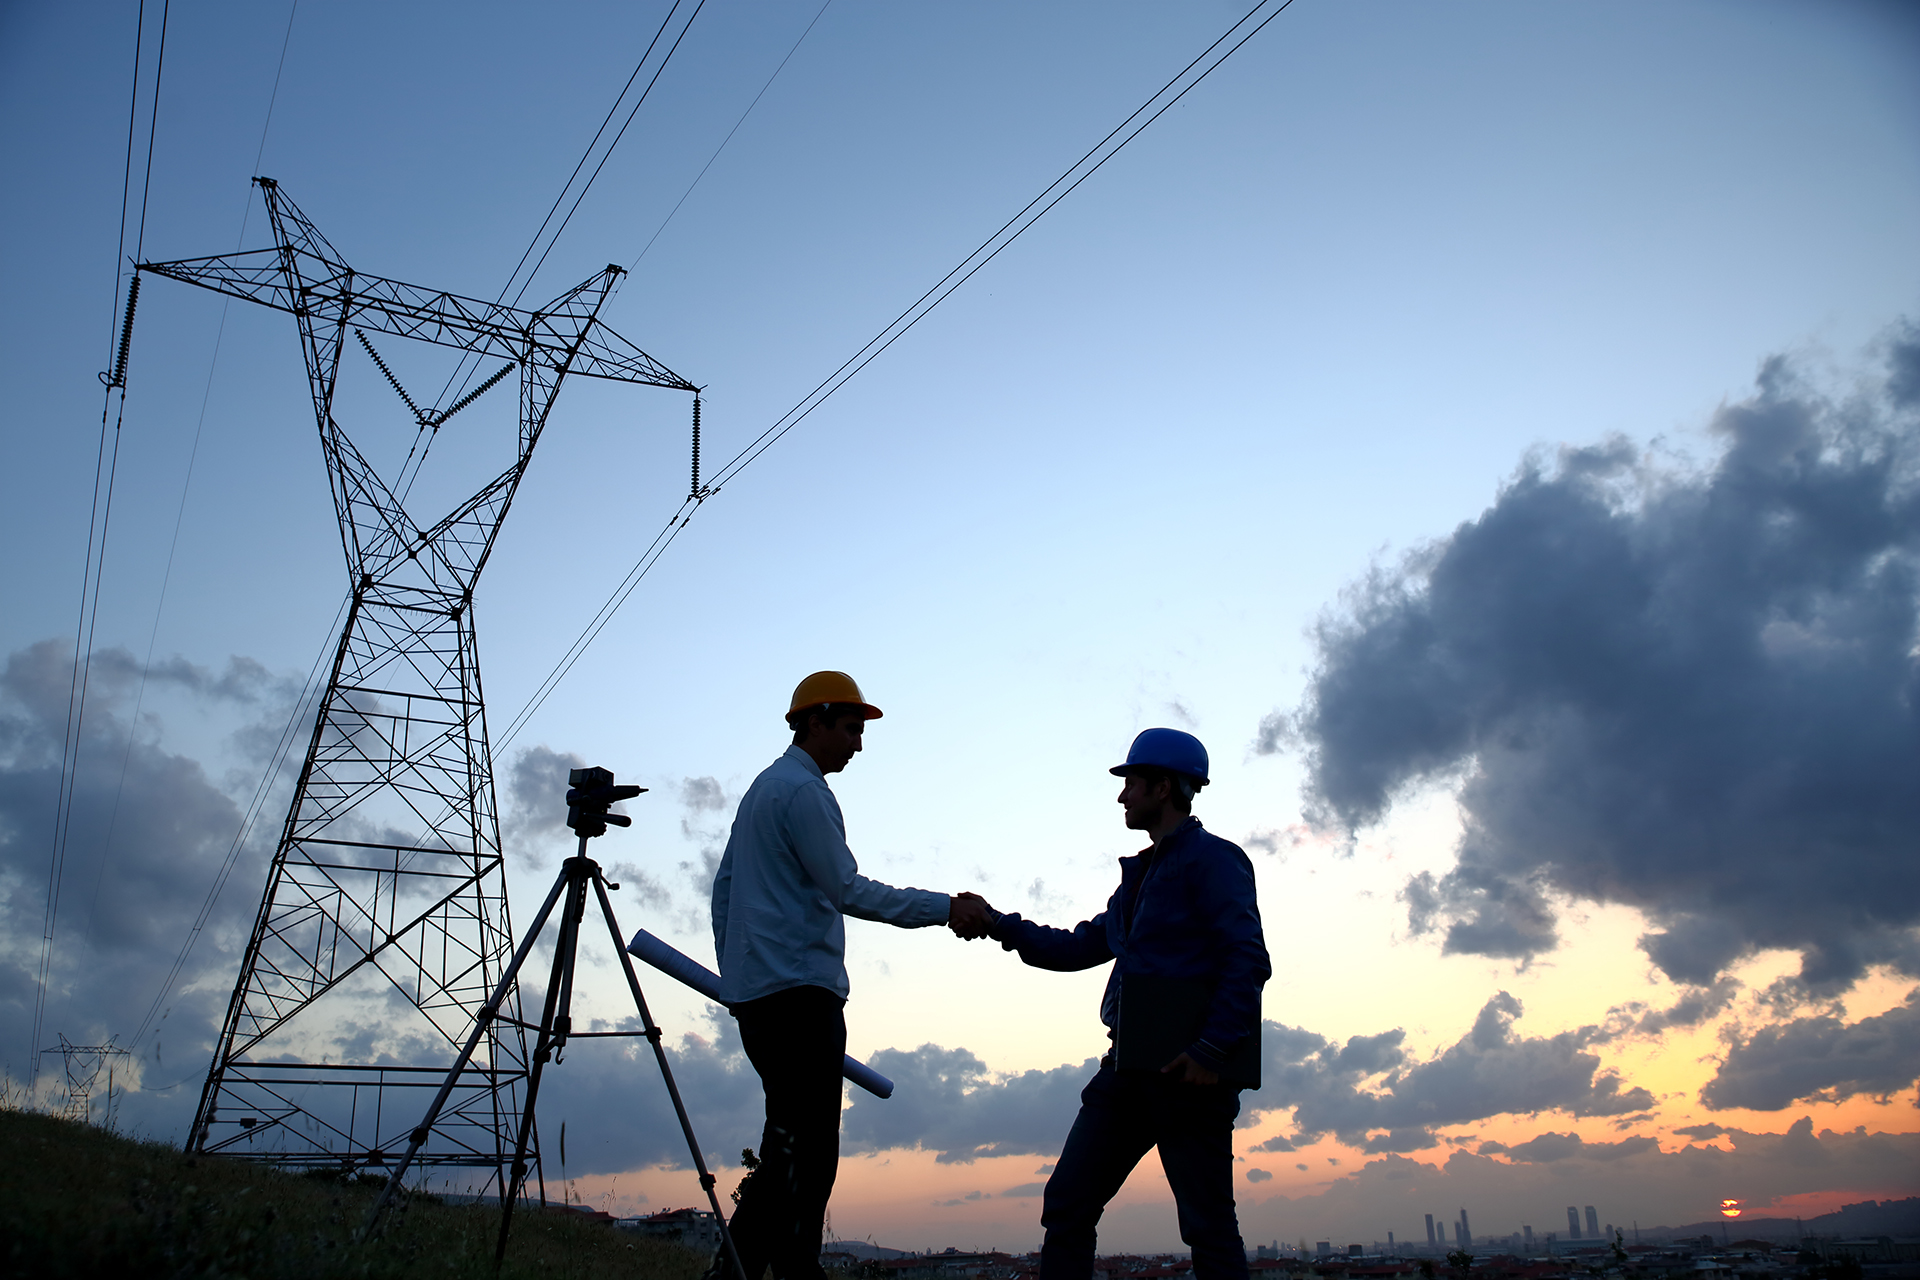 Two engineers shaking hands in front of a power line